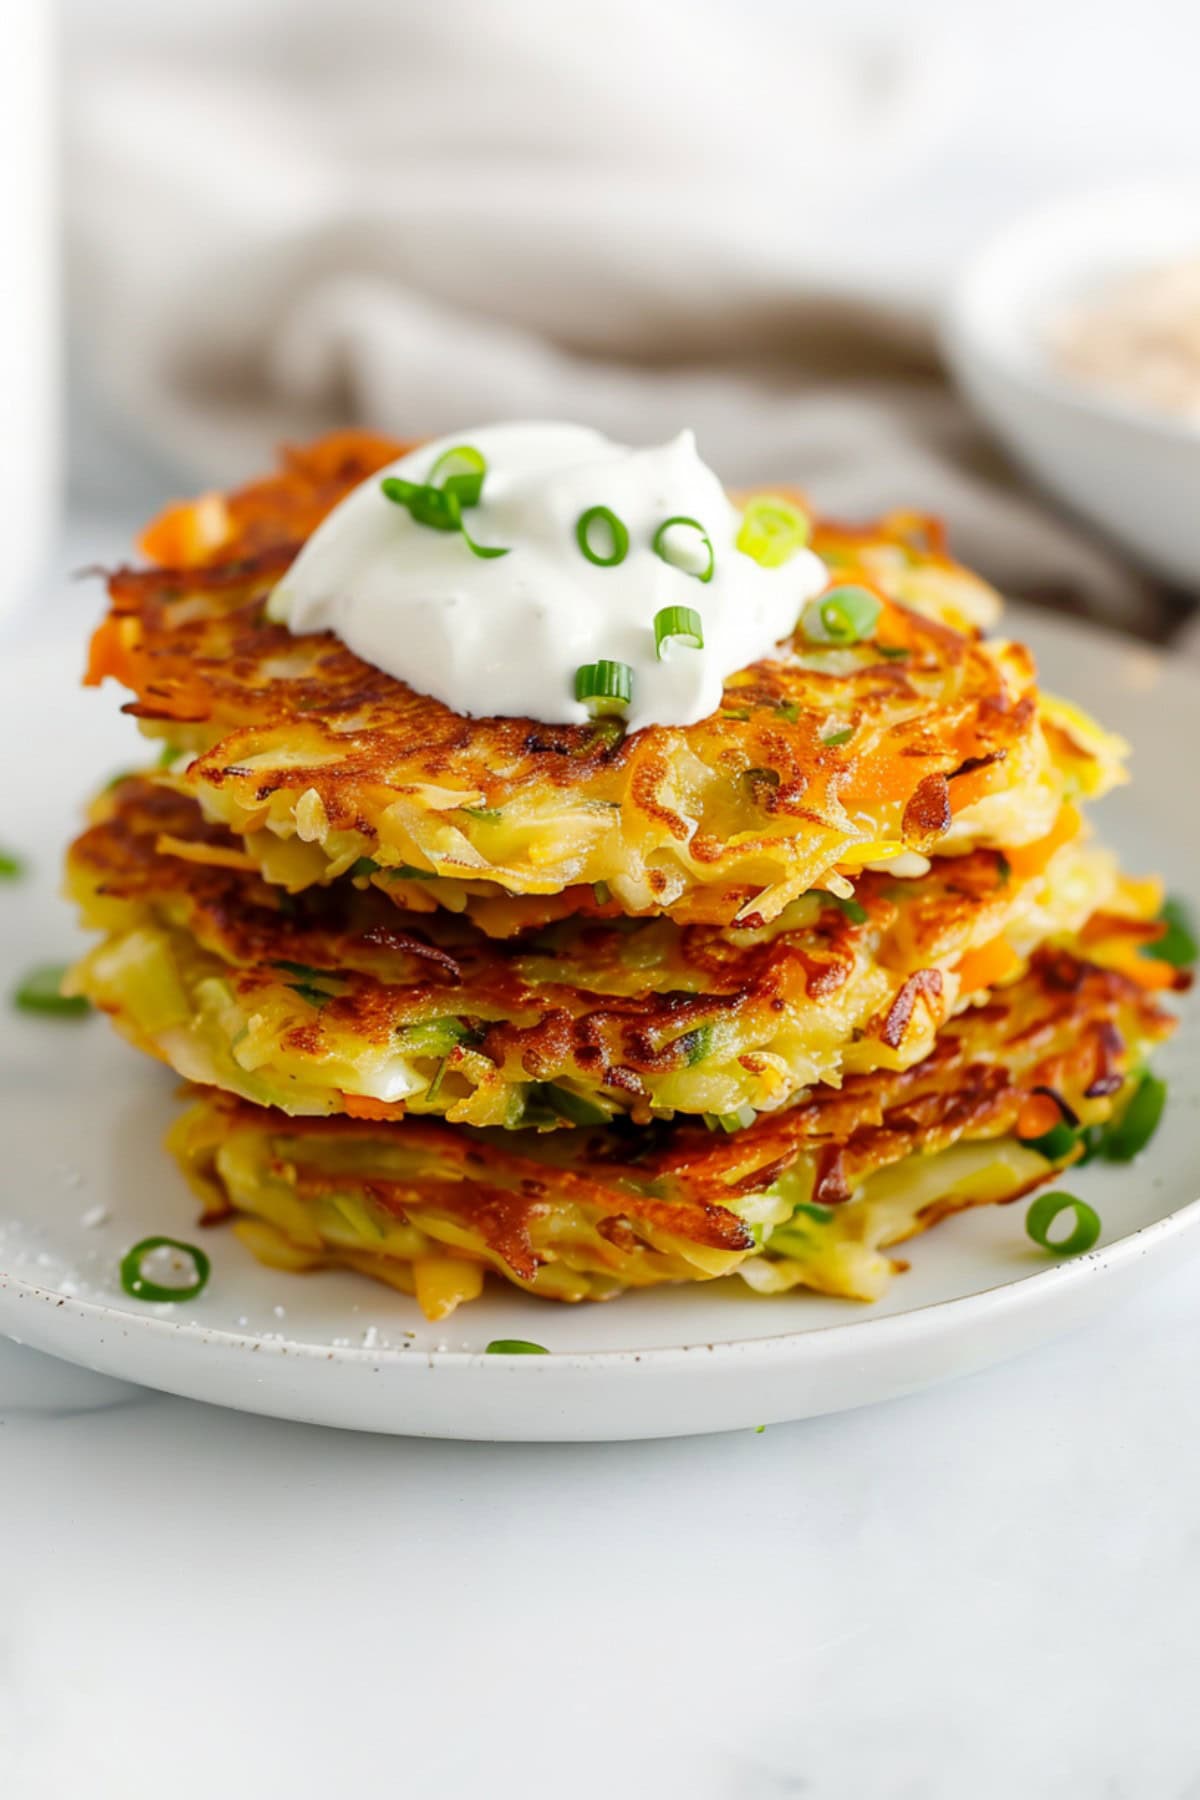 Crispy cabbage fritters with carrots and scallions, topped with sour cream